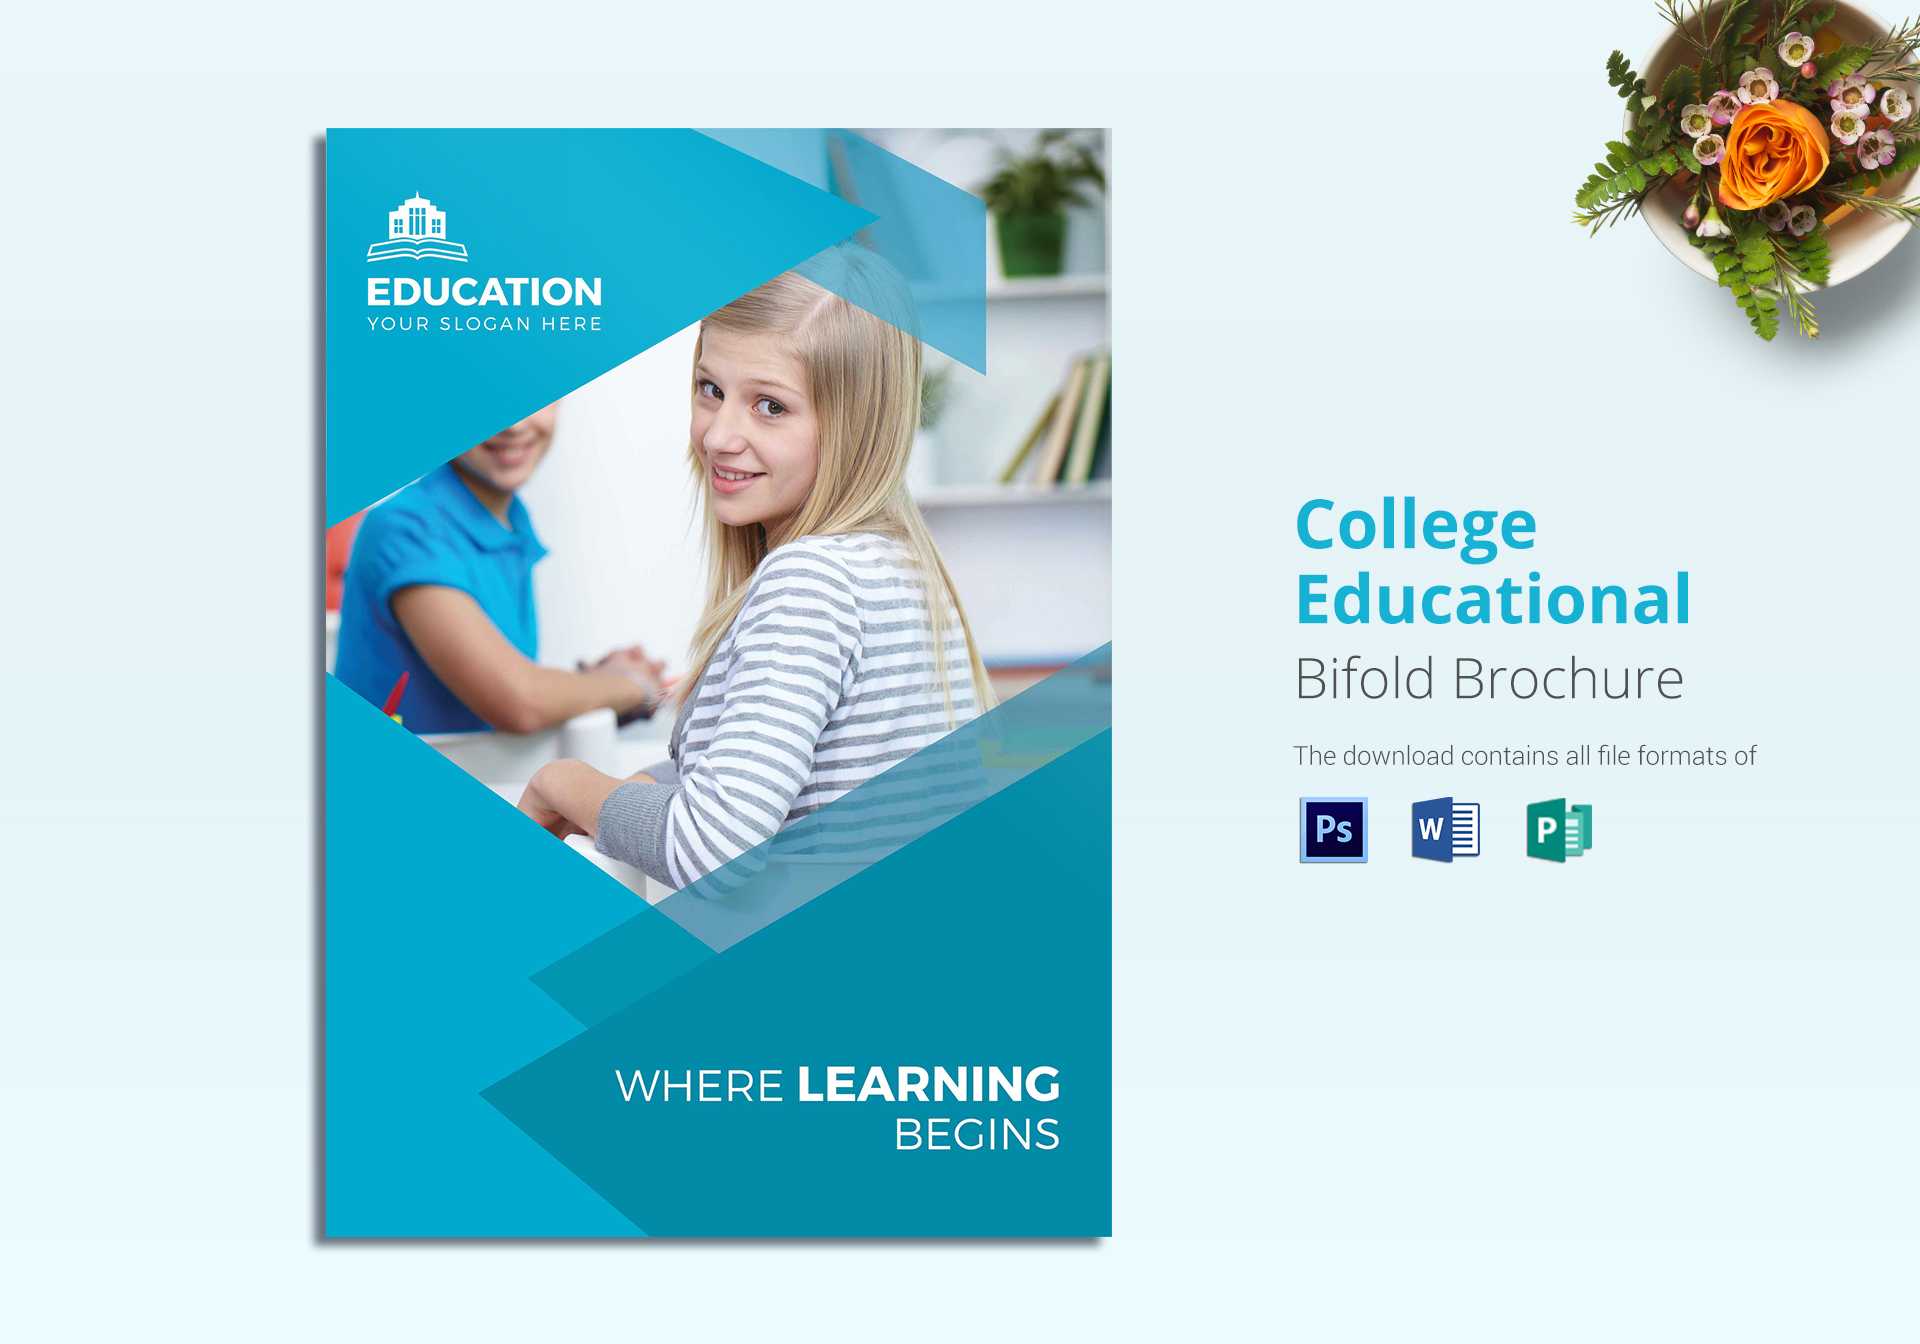 College Educational Brochure Template Intended For Brochure Design Templates For Education